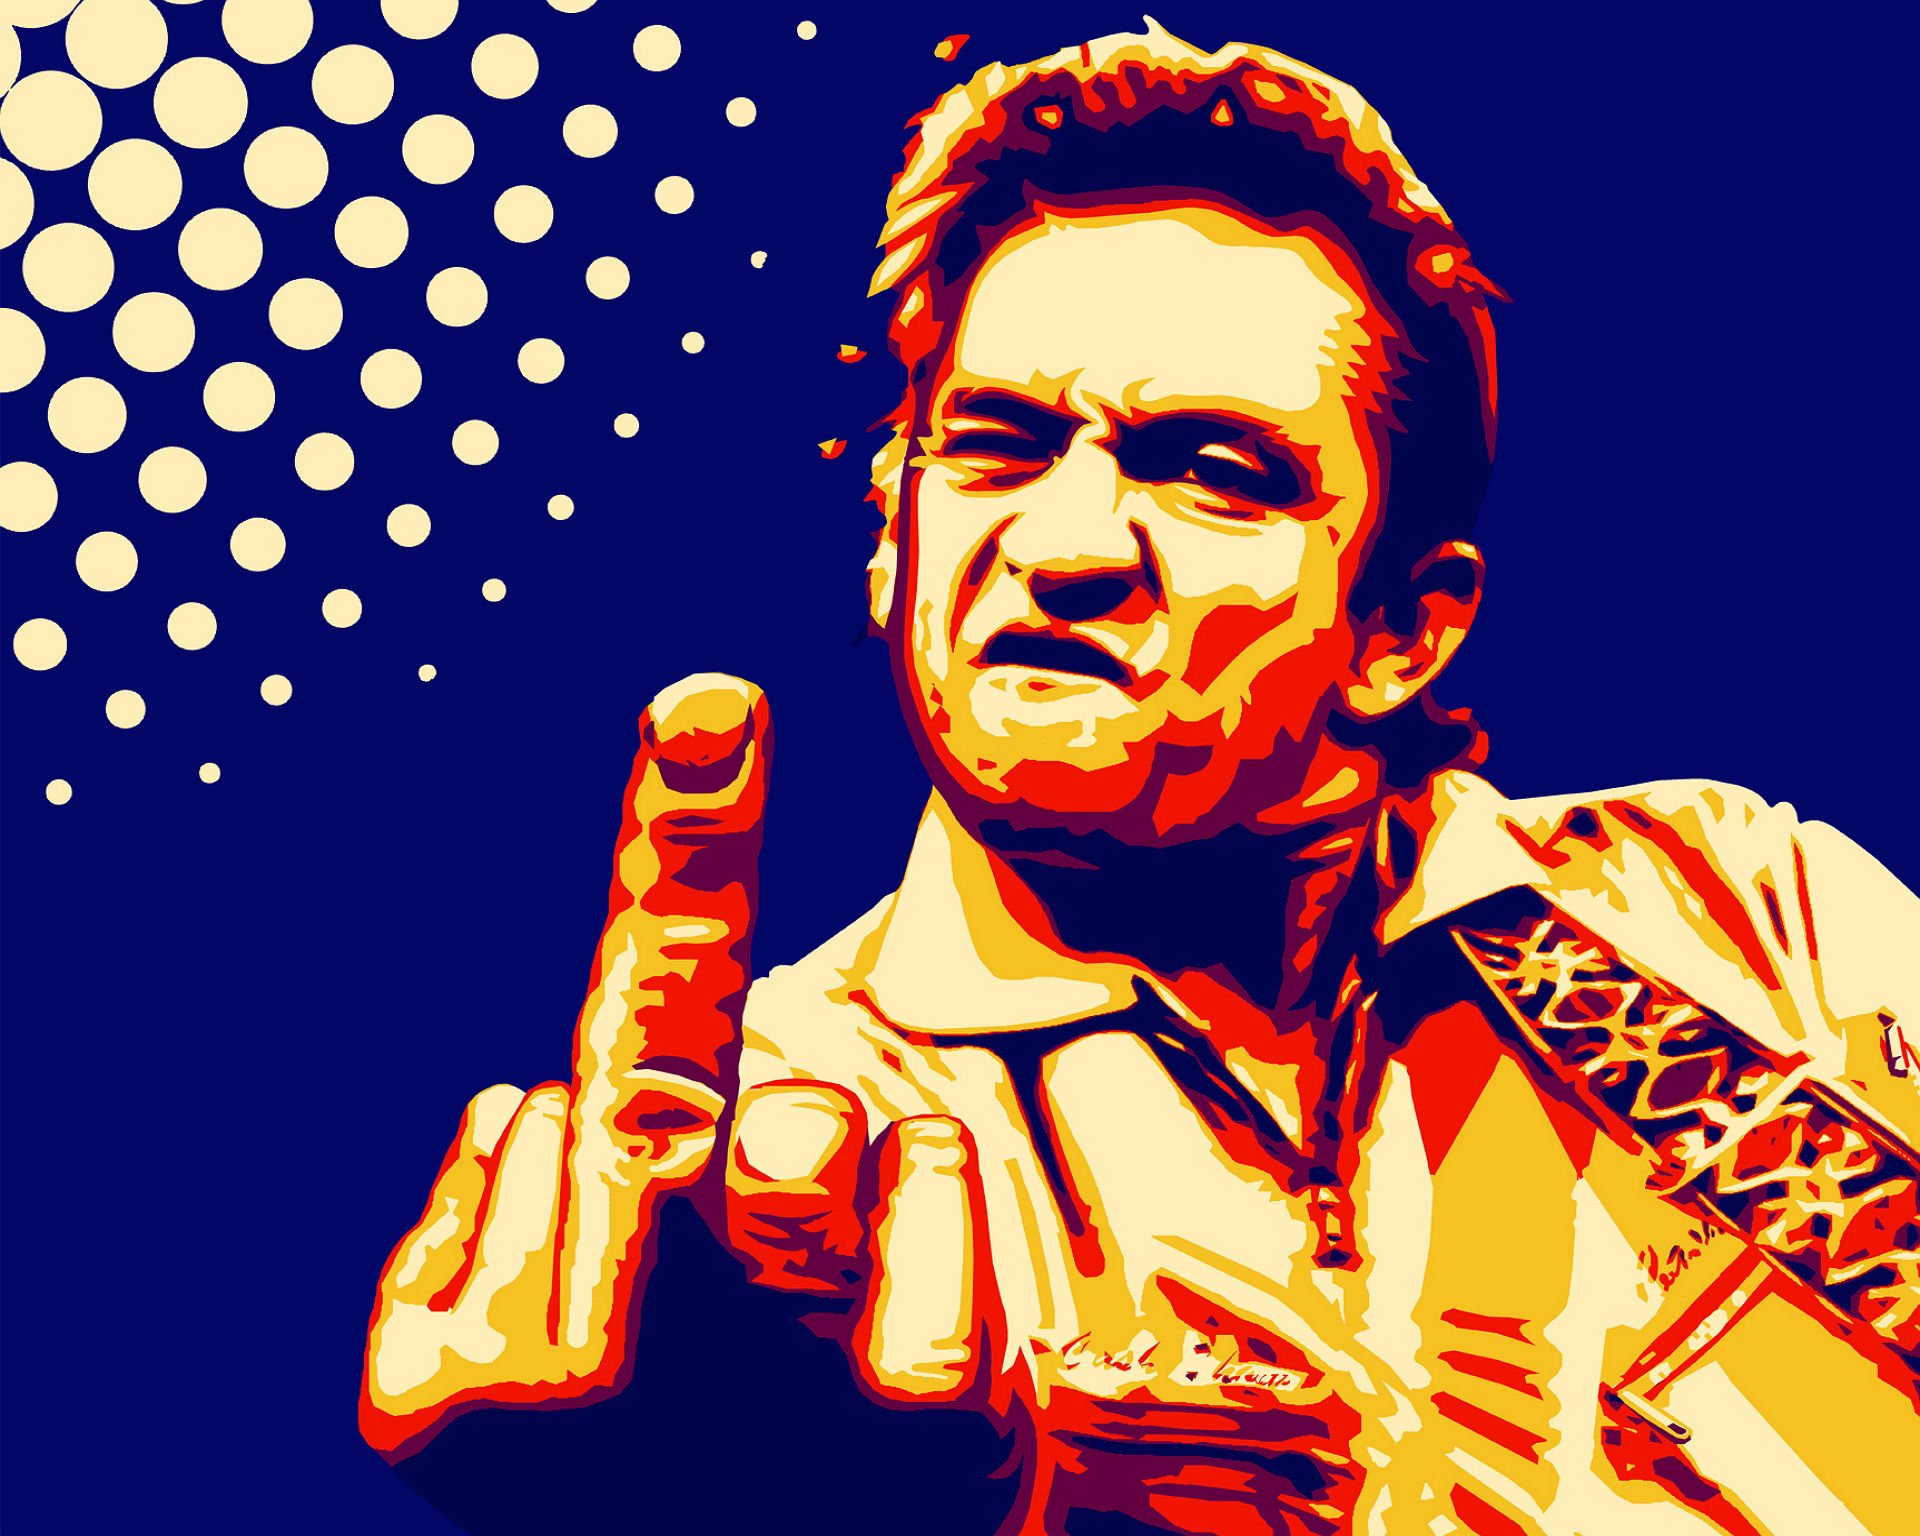 johnny, Cash, Countrywestern, Country, Western, Blues, Singer, 1jcash